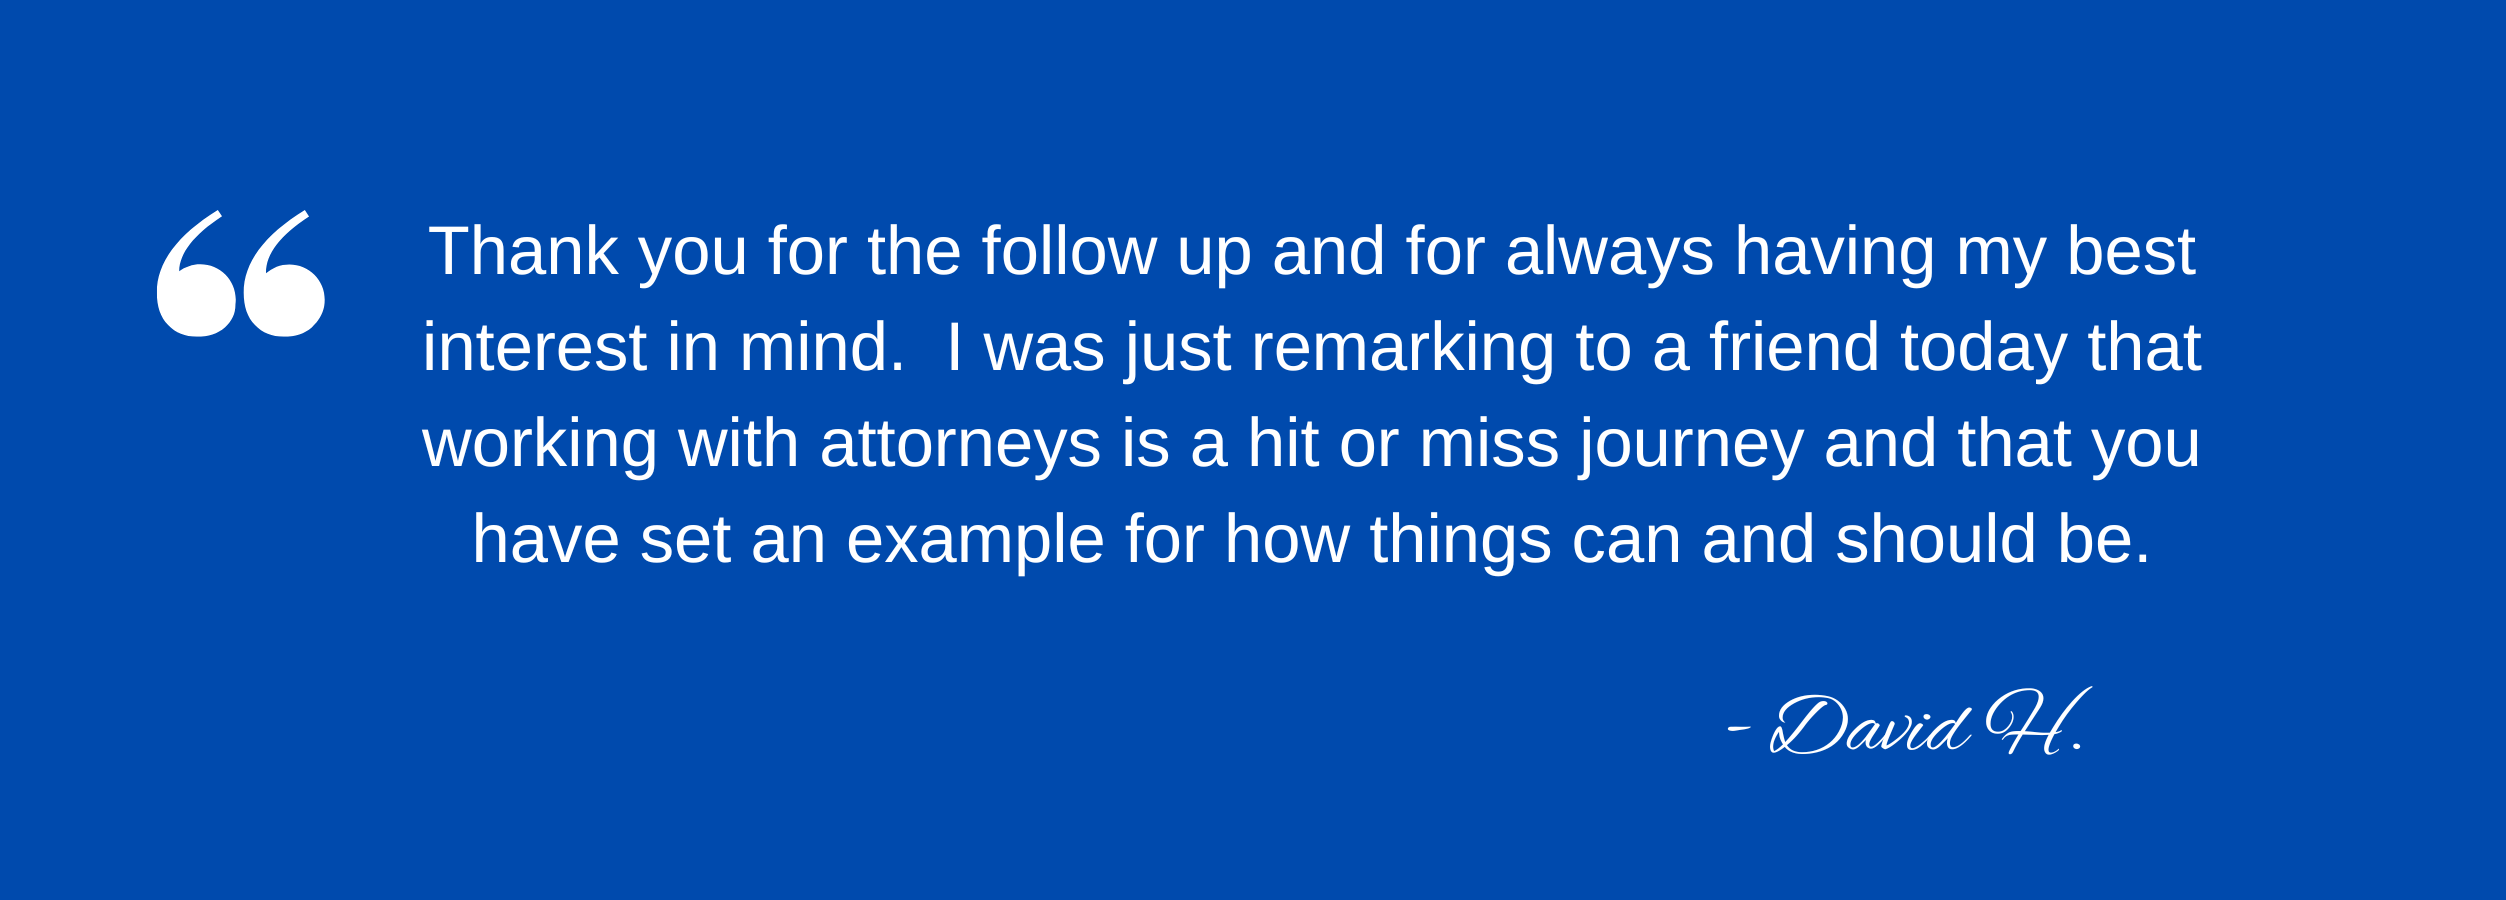 Testimonial - Thank you for the follow up and for always having my best interest in mind. I was just remarking to a friend today that working with attorneys is a hit or miss journey and that you have set an example for how things can and should be.